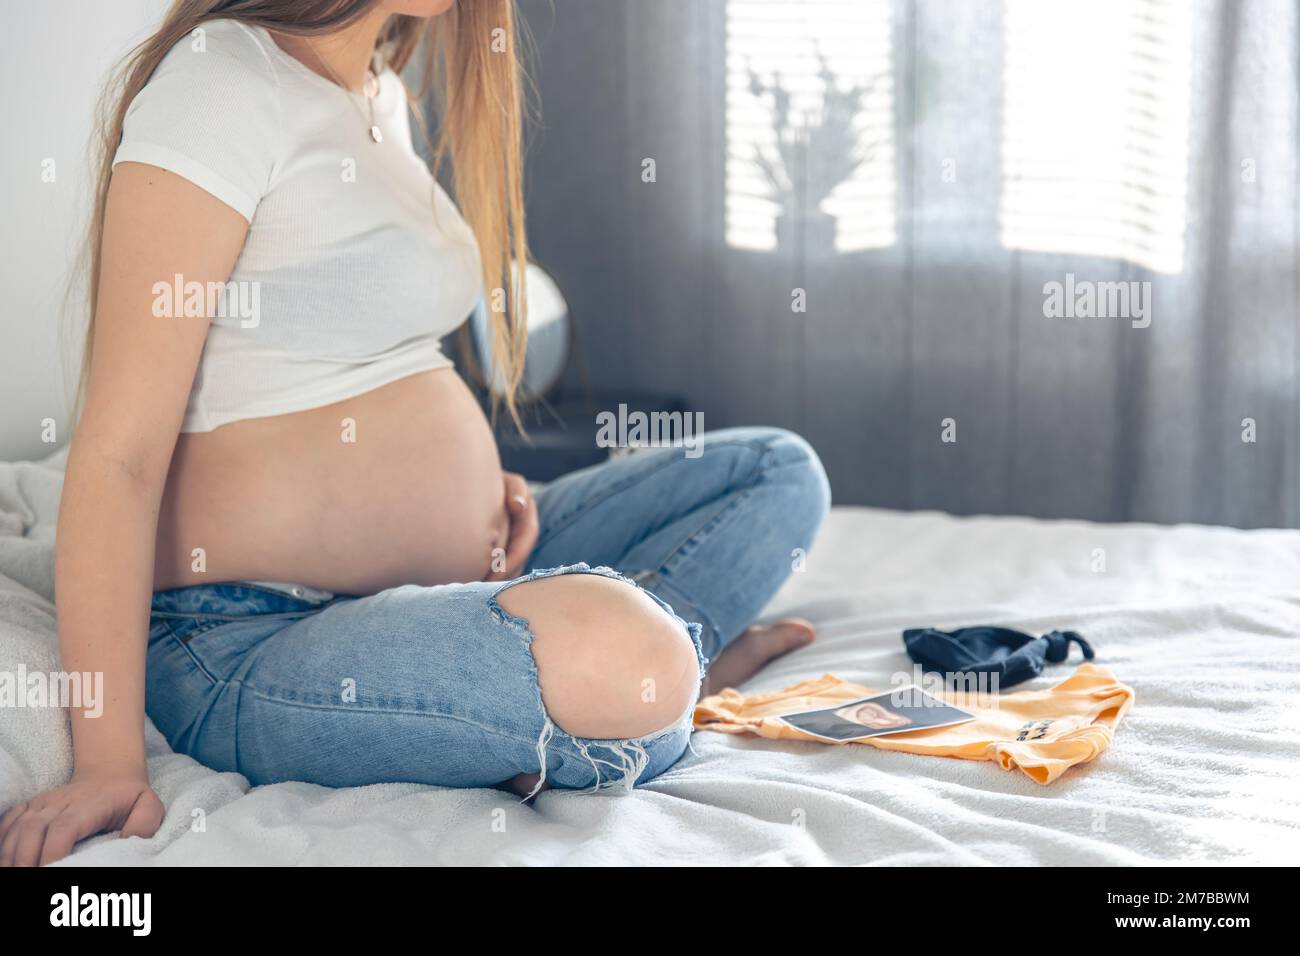 Pregnant woman looking ultrasound photo album on bed Stock Photo by  ©geargodz 250442426